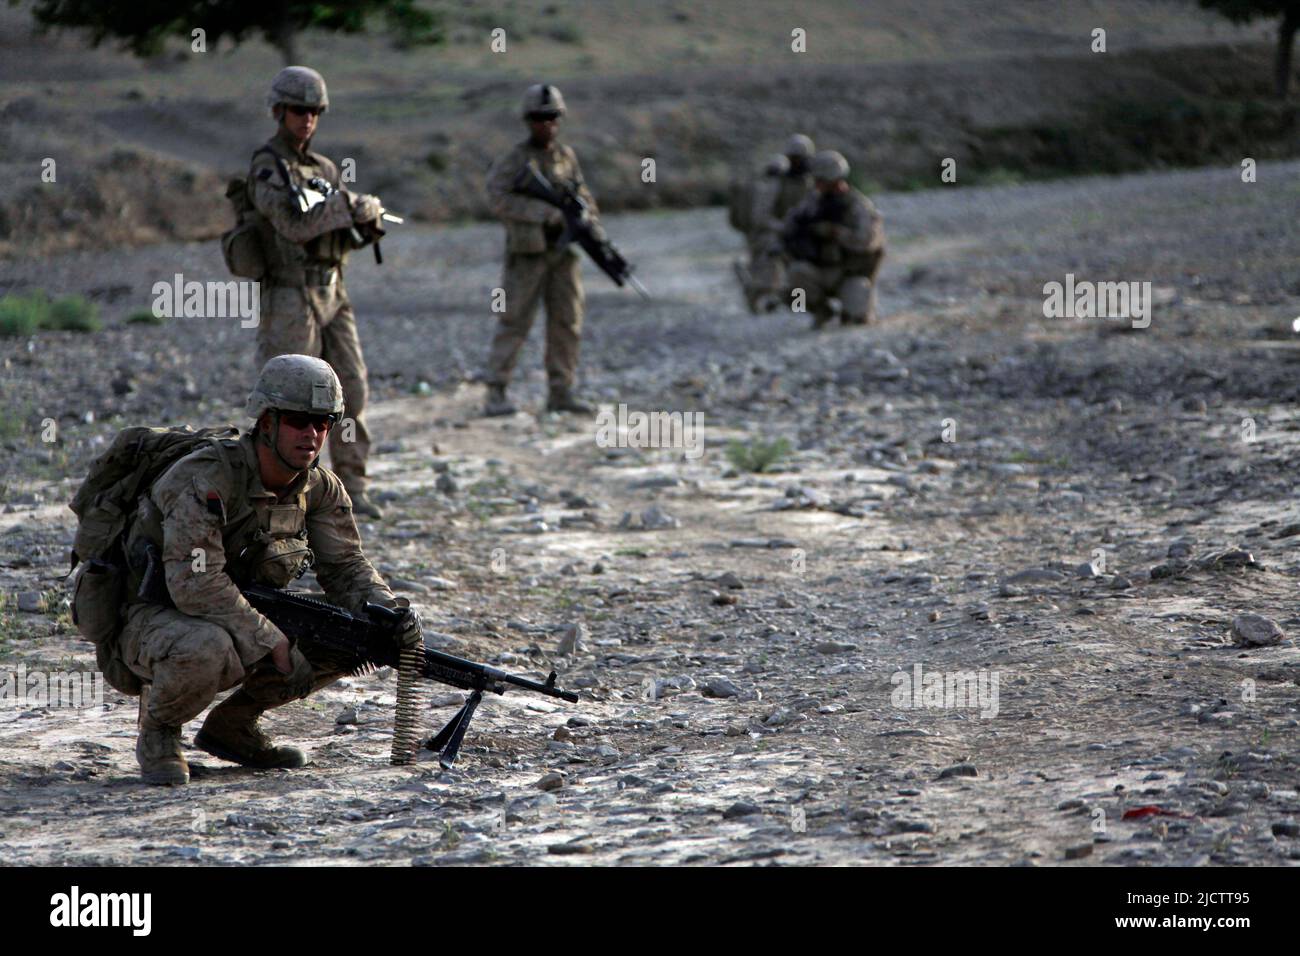 U.S. Marines with 1st Battalion, 8th Marine Regiment (1/8), Regimental Combat Team 6, halt during a security patrol in the Fulads, Helmand province, A Stock Photo